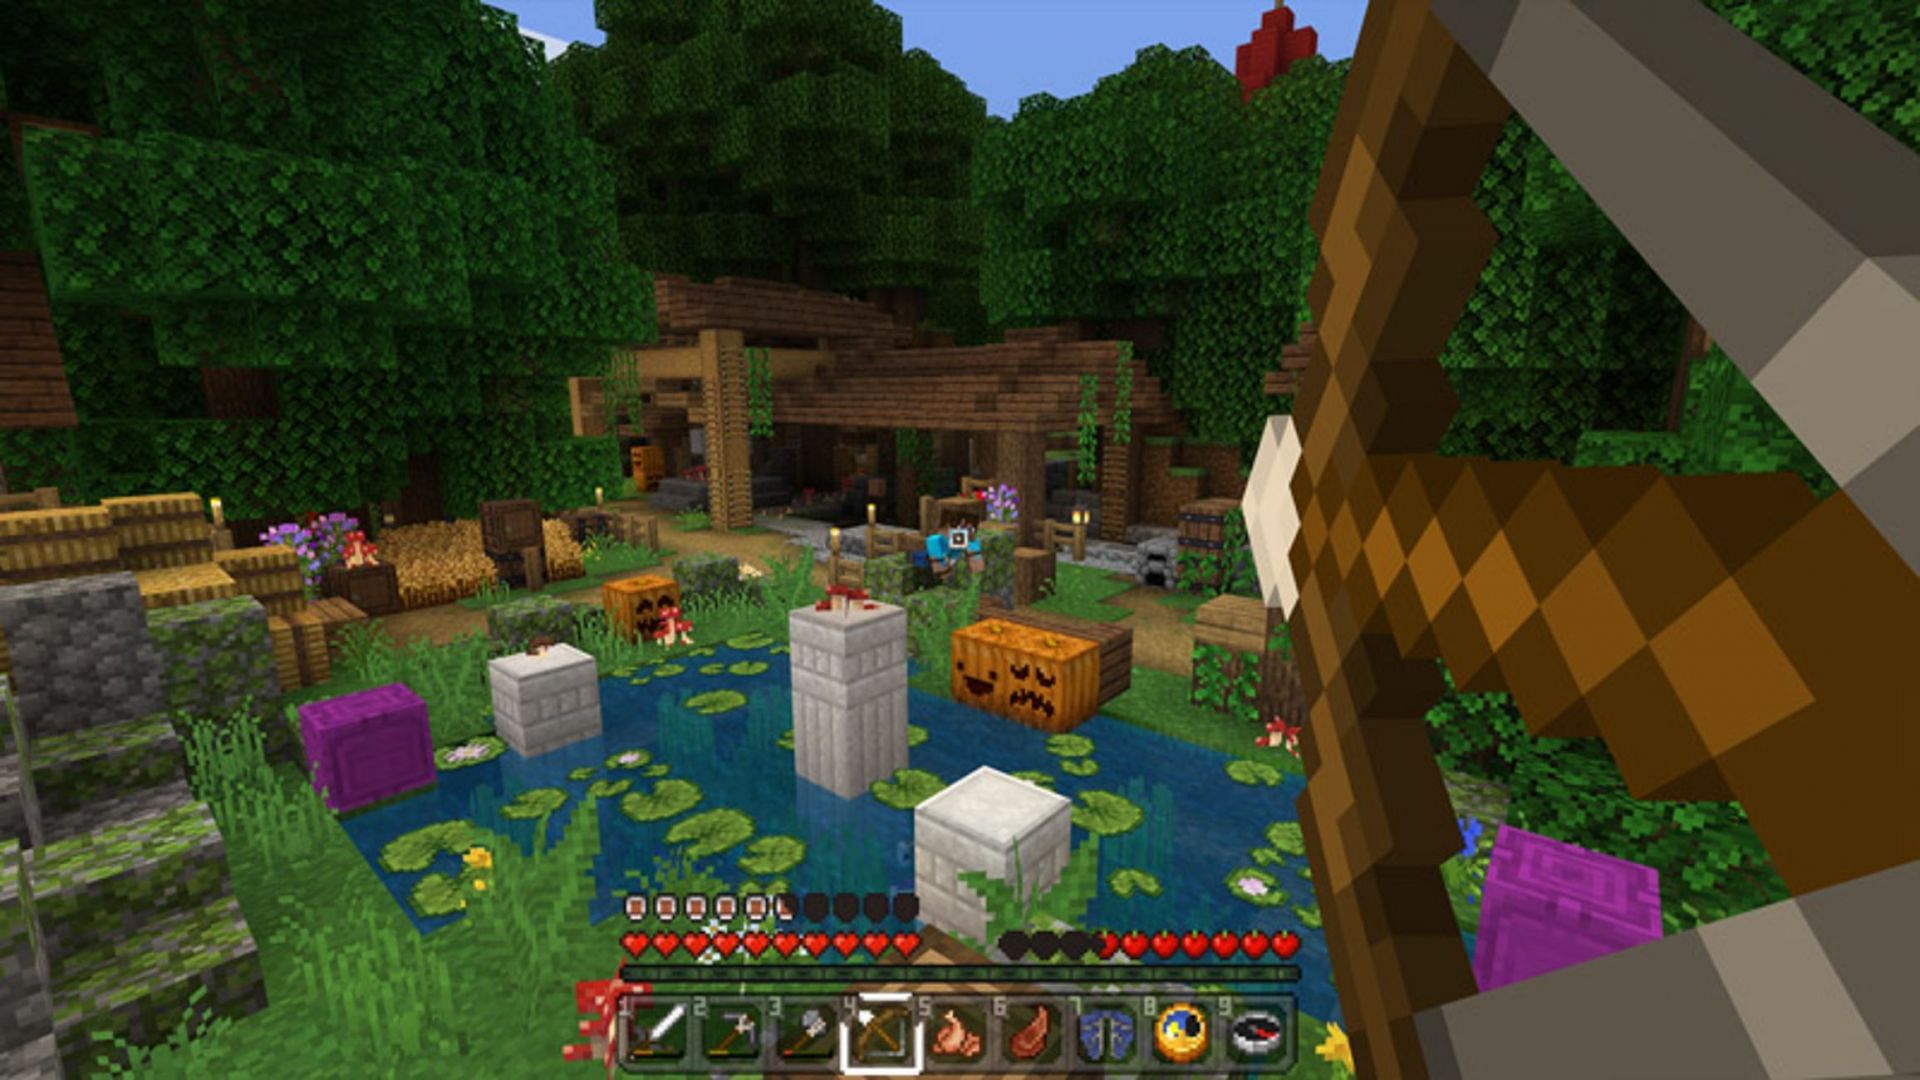 This texture pack expands on what makes Minecraft&#039;s base textures great (Image via Owls Cubed)